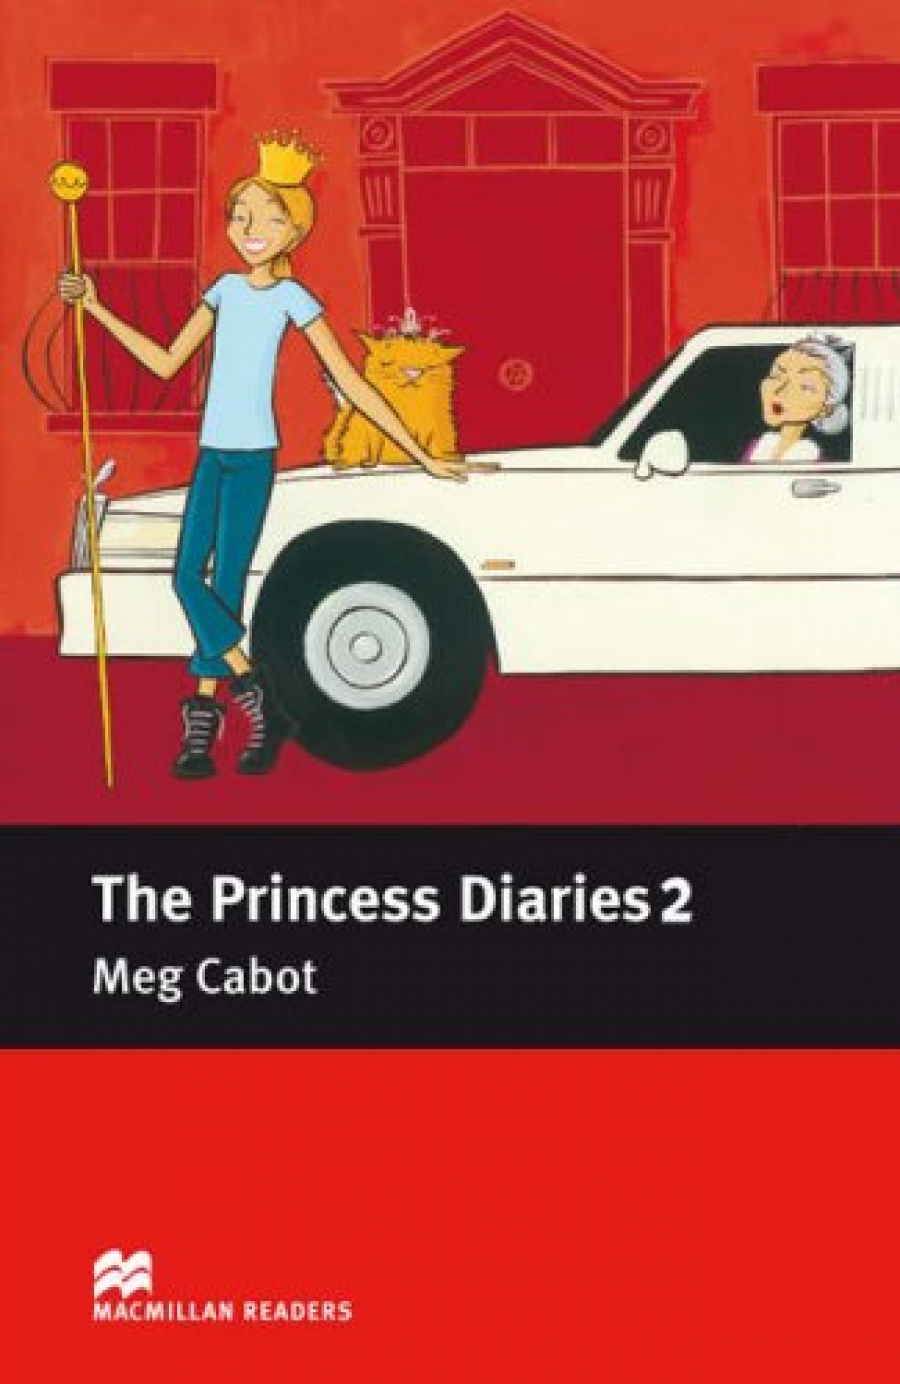 Meg Cabot, retold by Anne Collins The Princess Diaries: Book 2 